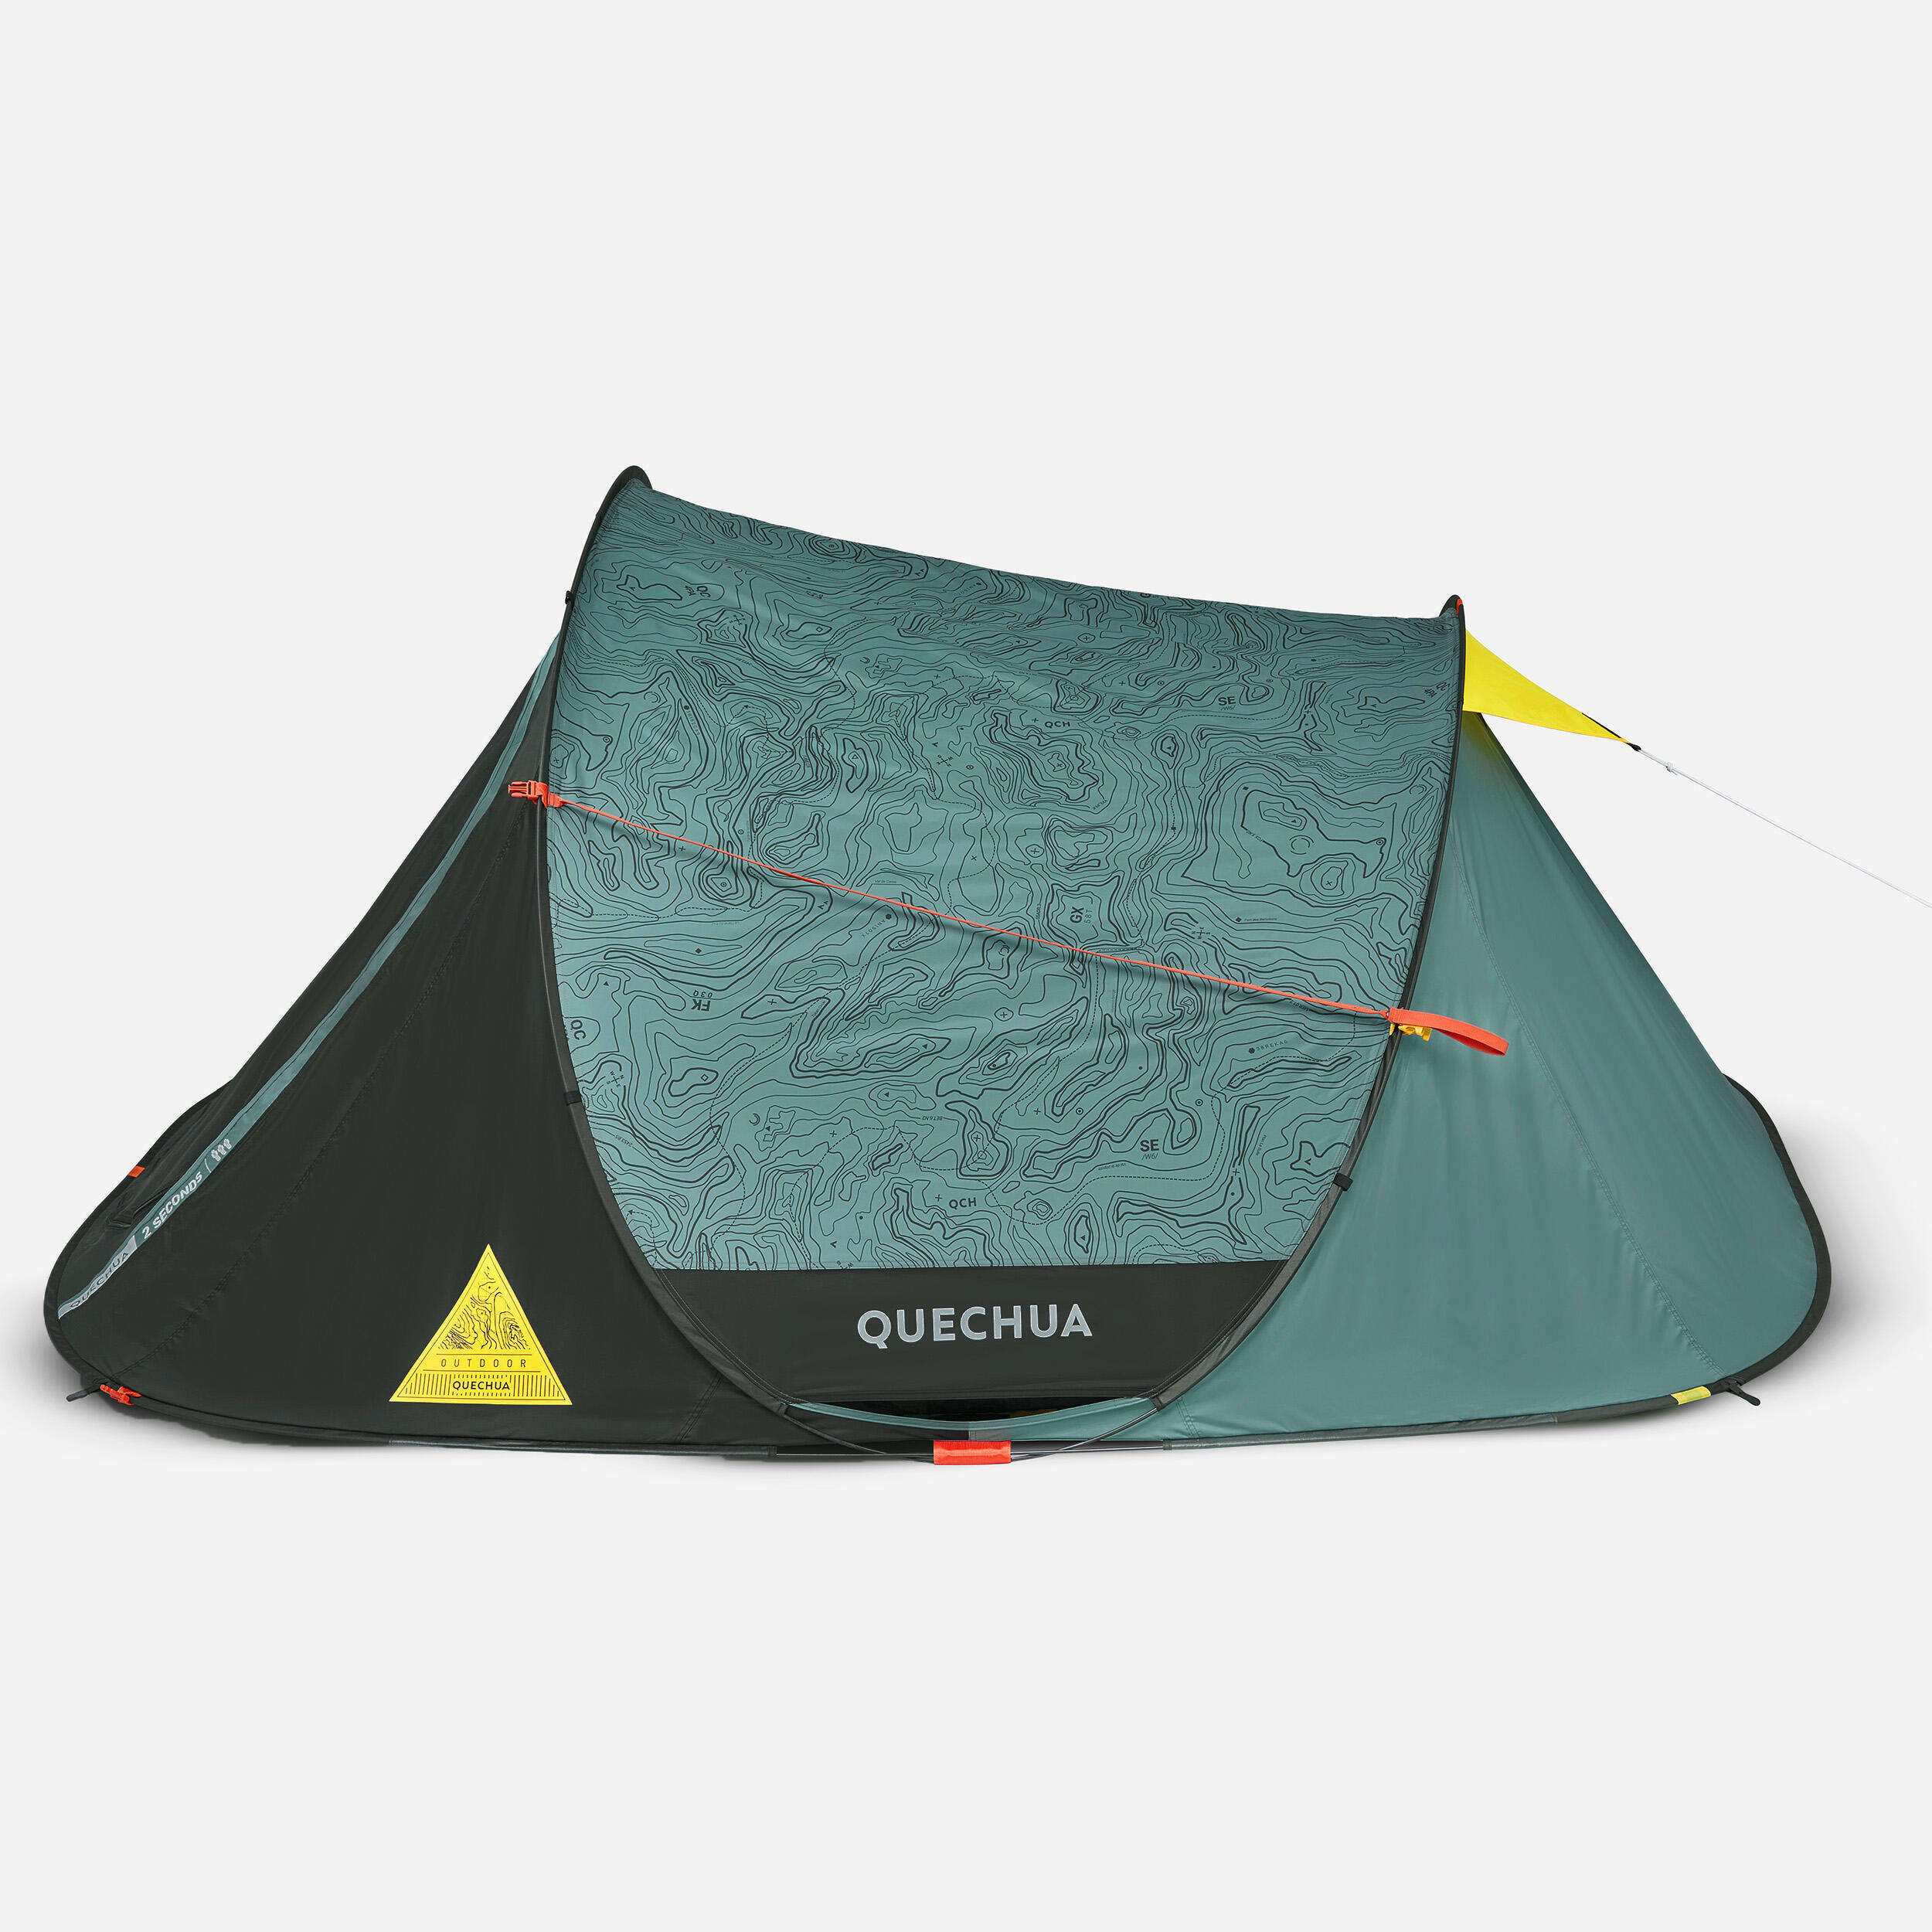 Camping tent - 2 SECONDS - 3-person 6/9